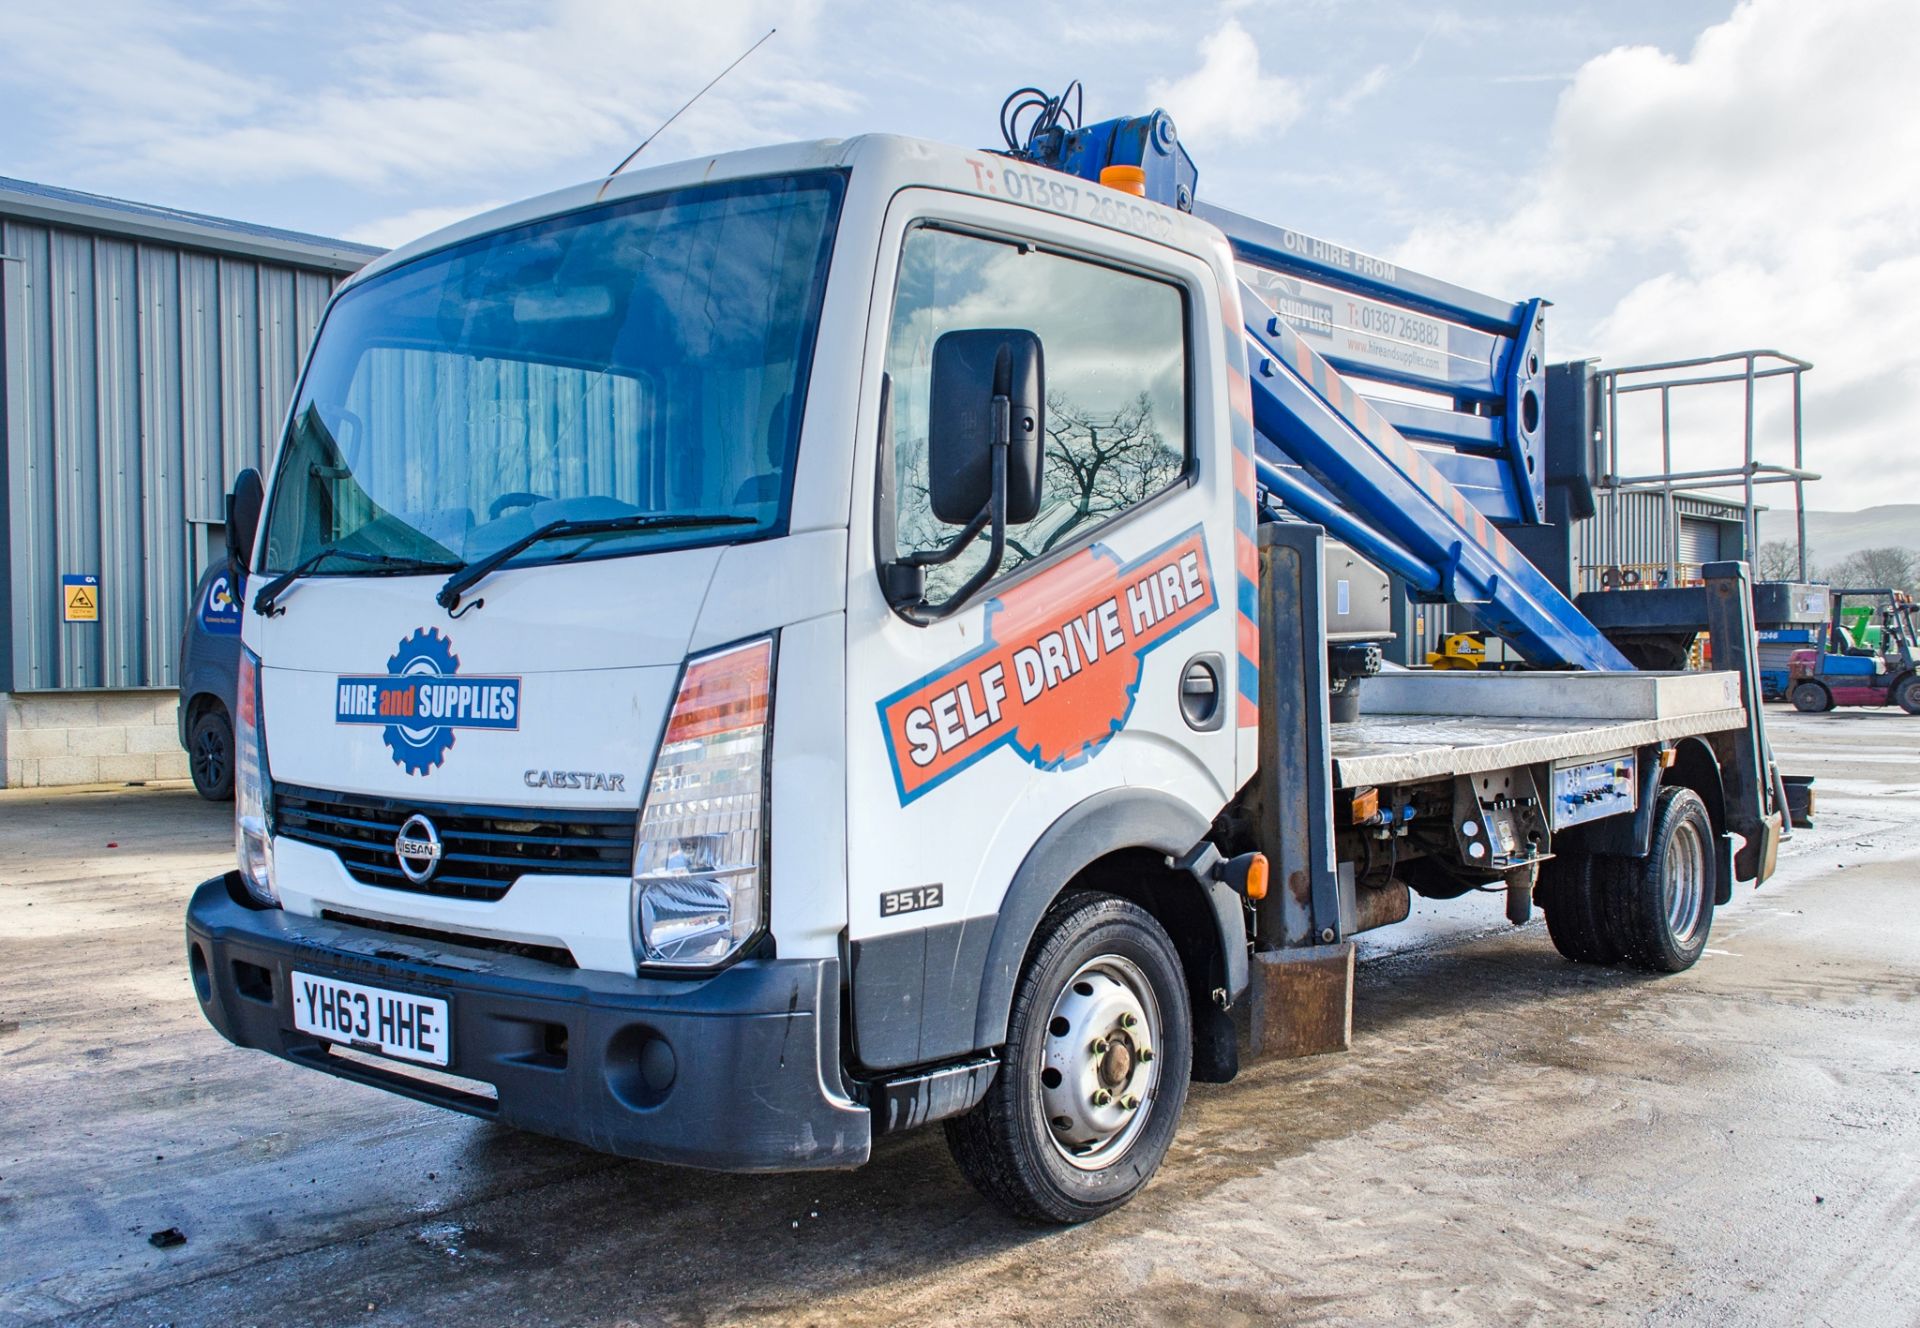 Nissan Cabstar 35.14 S/C LWB cherry picker MEWP Registration Number: YH63 HHE Date of